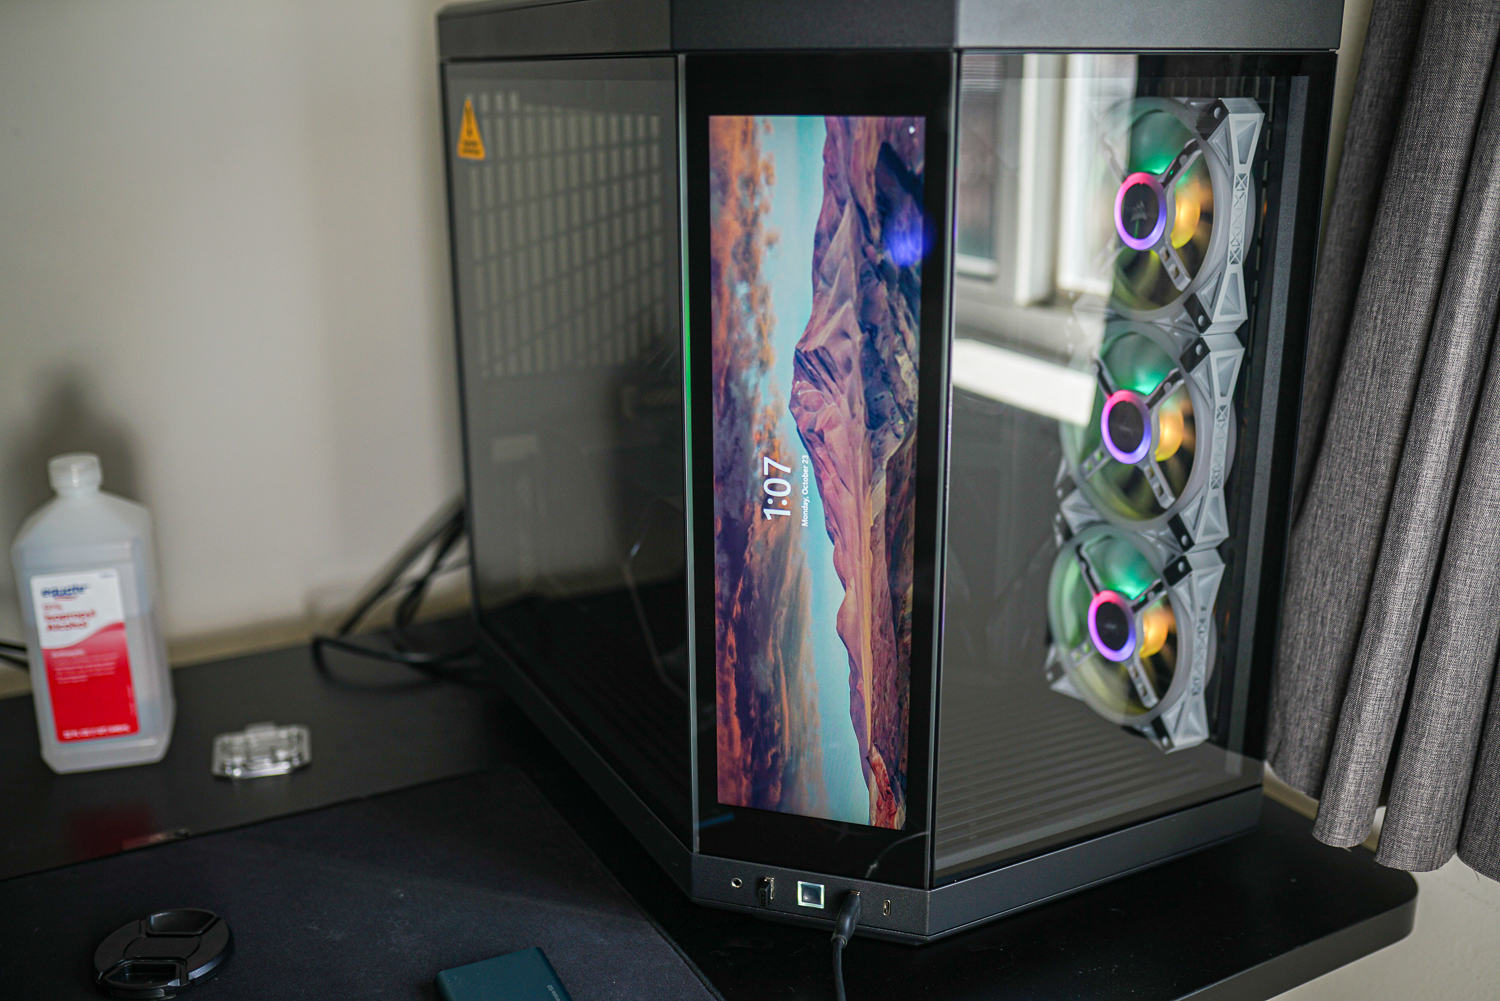 This PC case has a touchscreen, and it's not just a gimmick